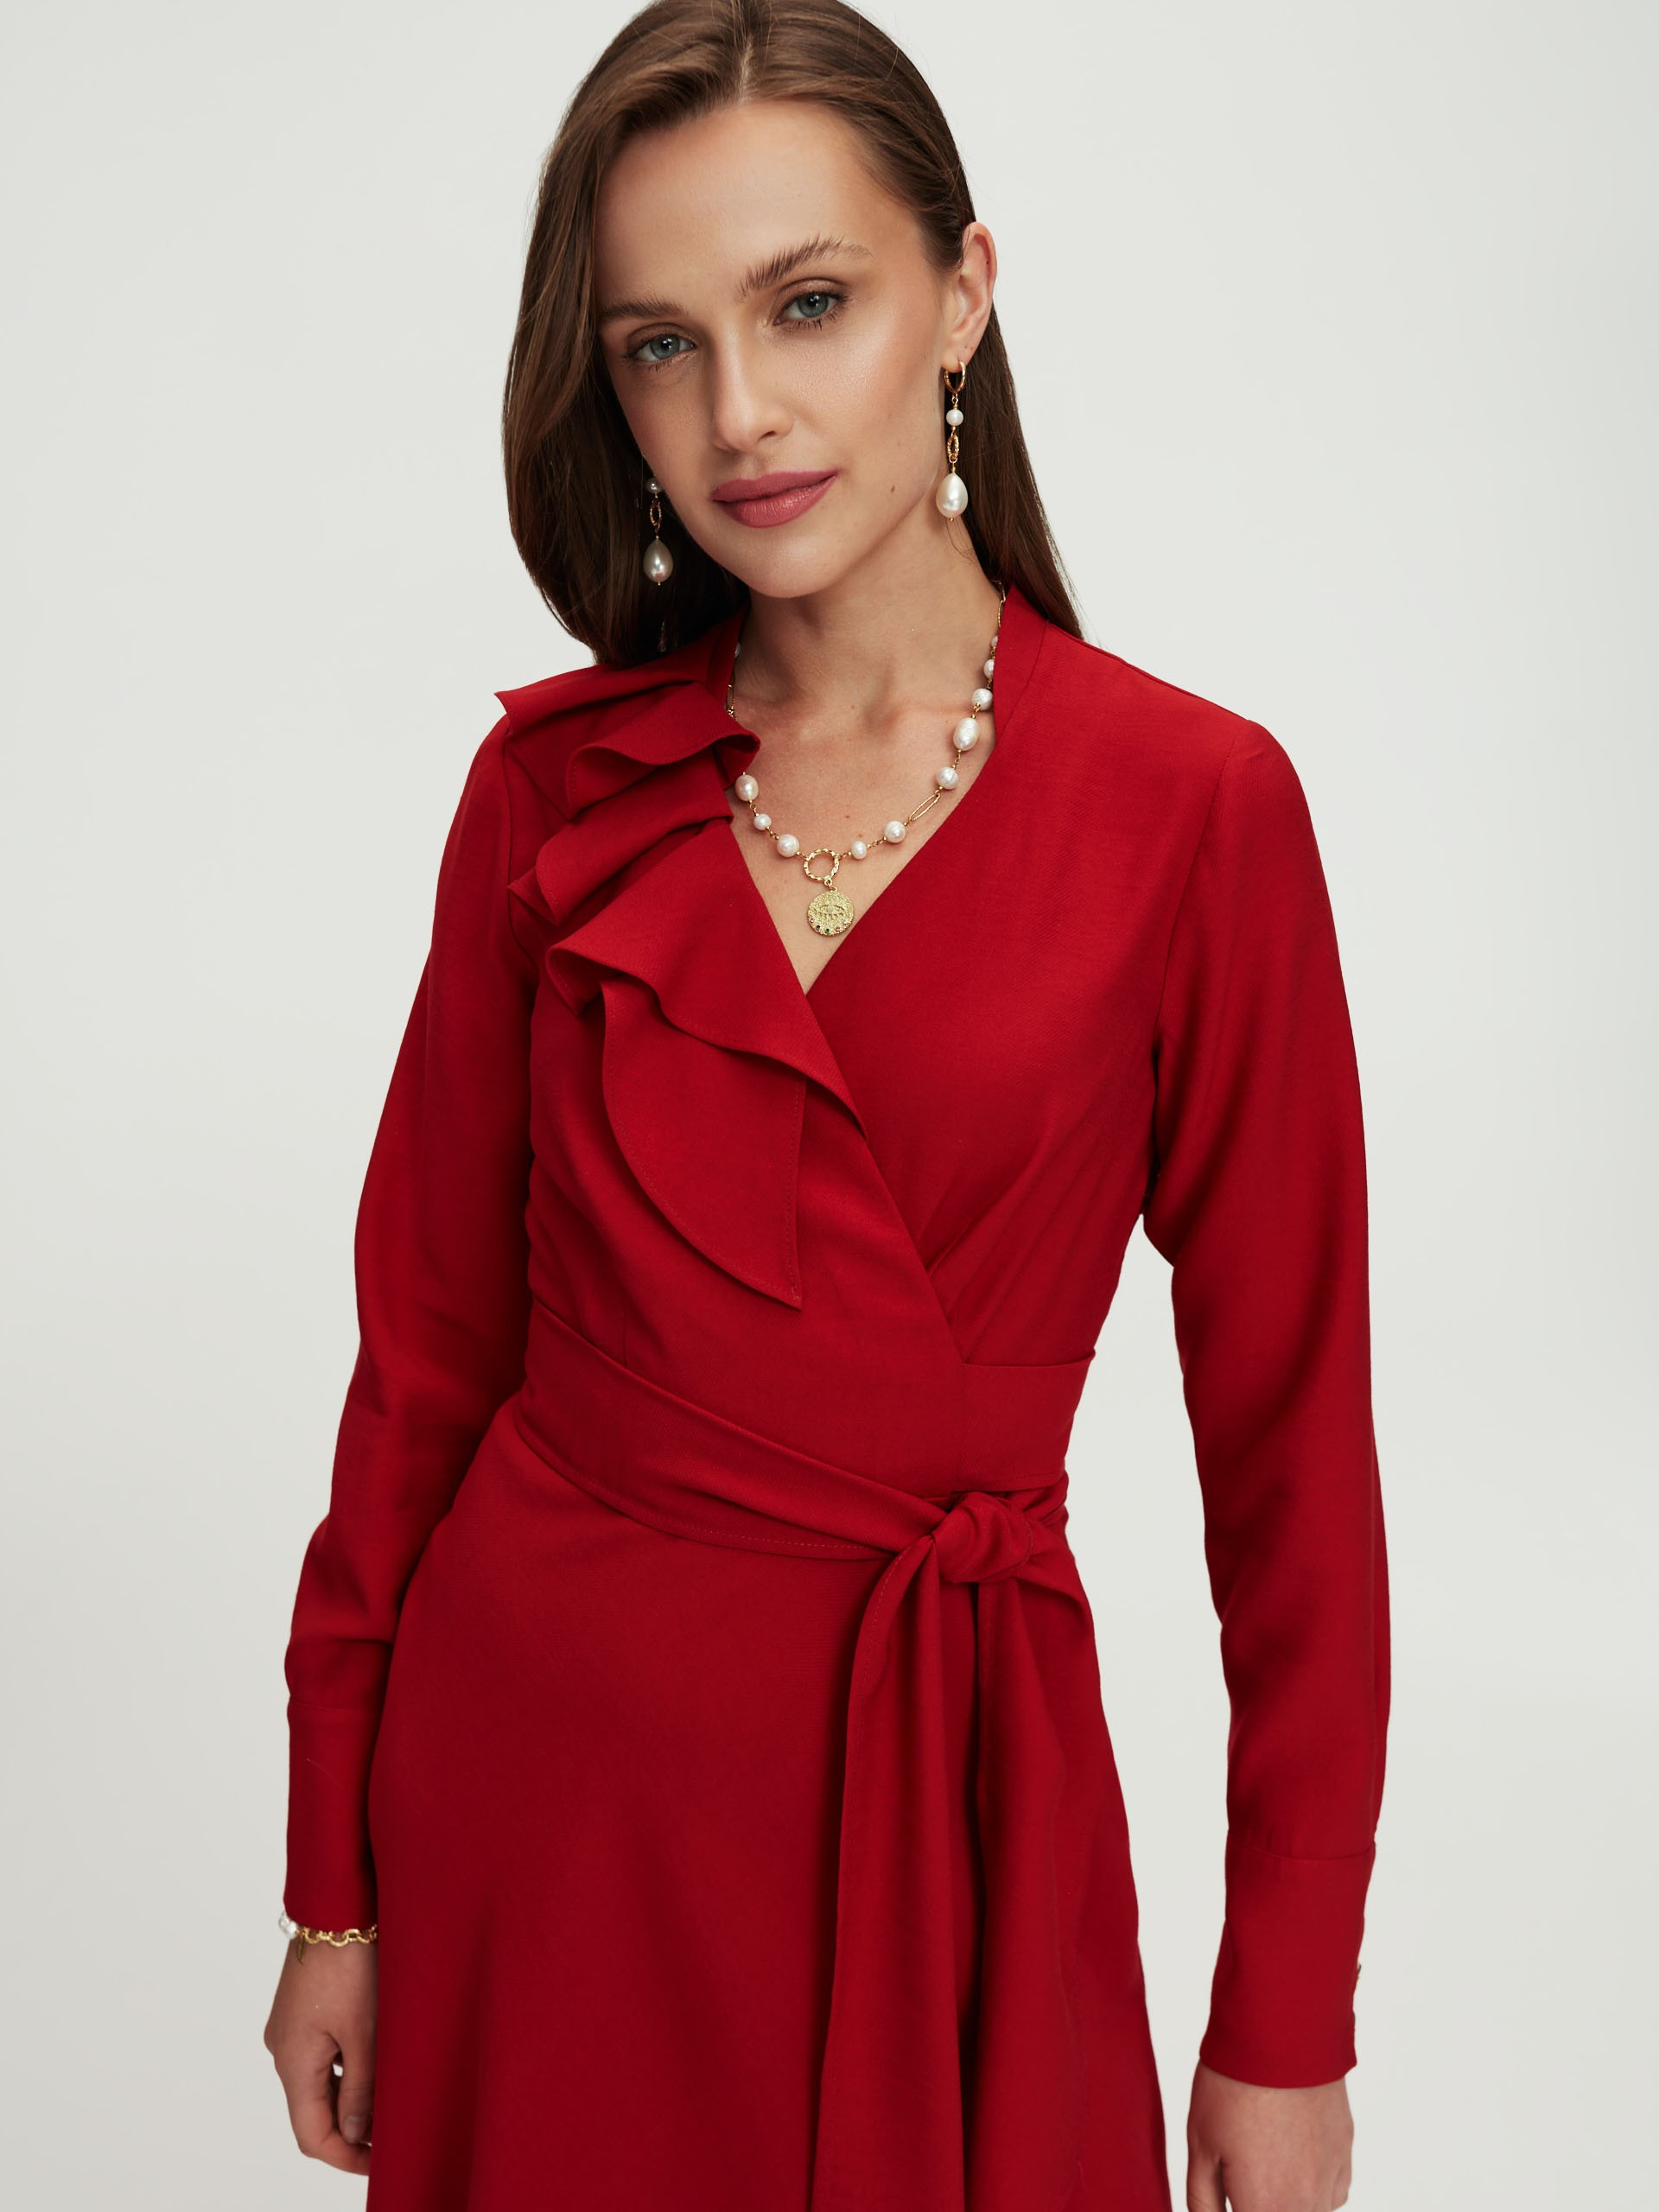 Red dress with a ruffle at the neckline